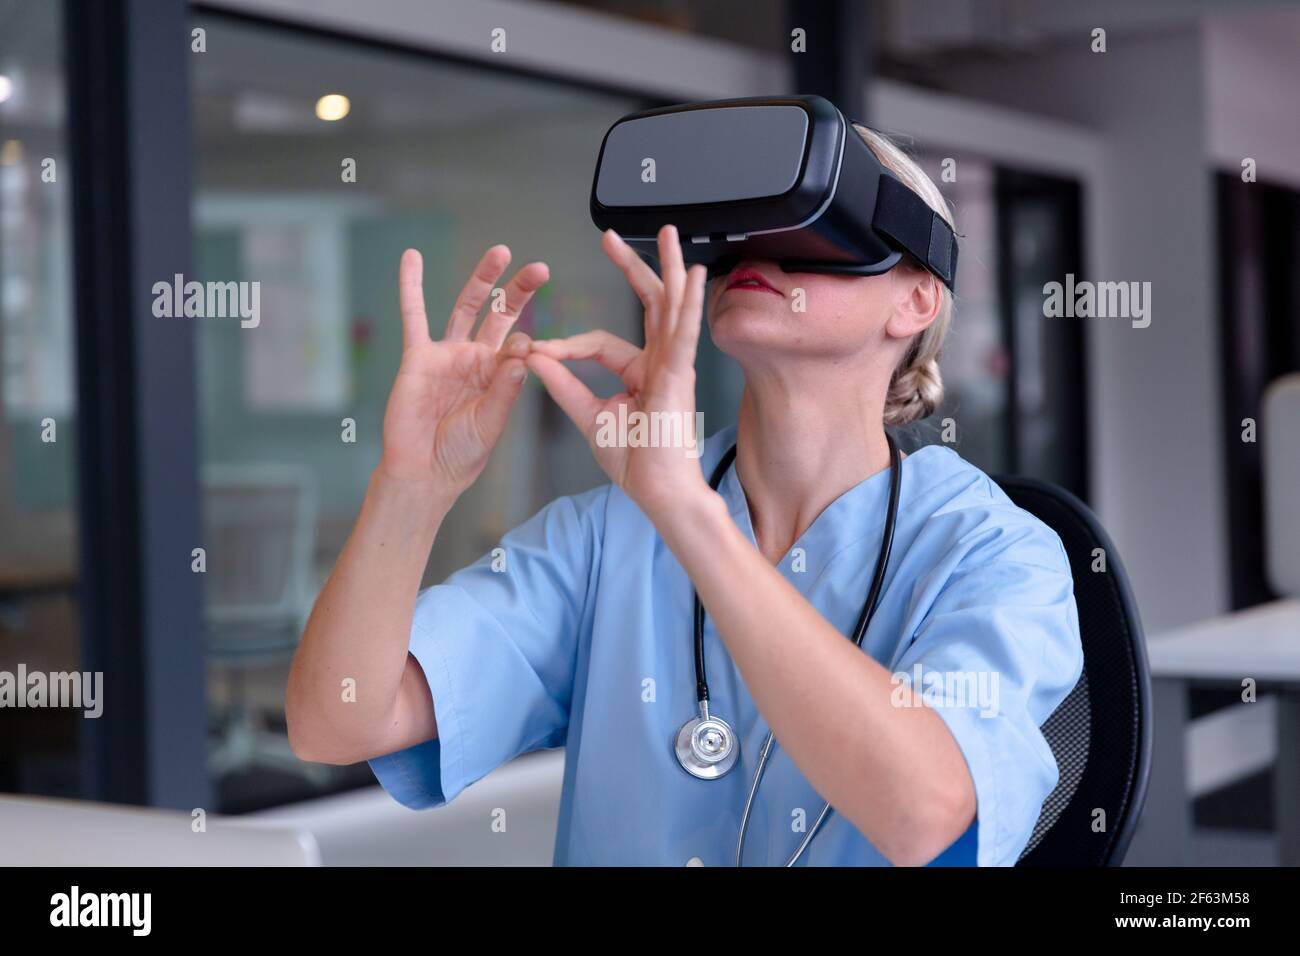 Caucasian female doctor wearing scrubs using vr headset and virtual interface Stock Photo